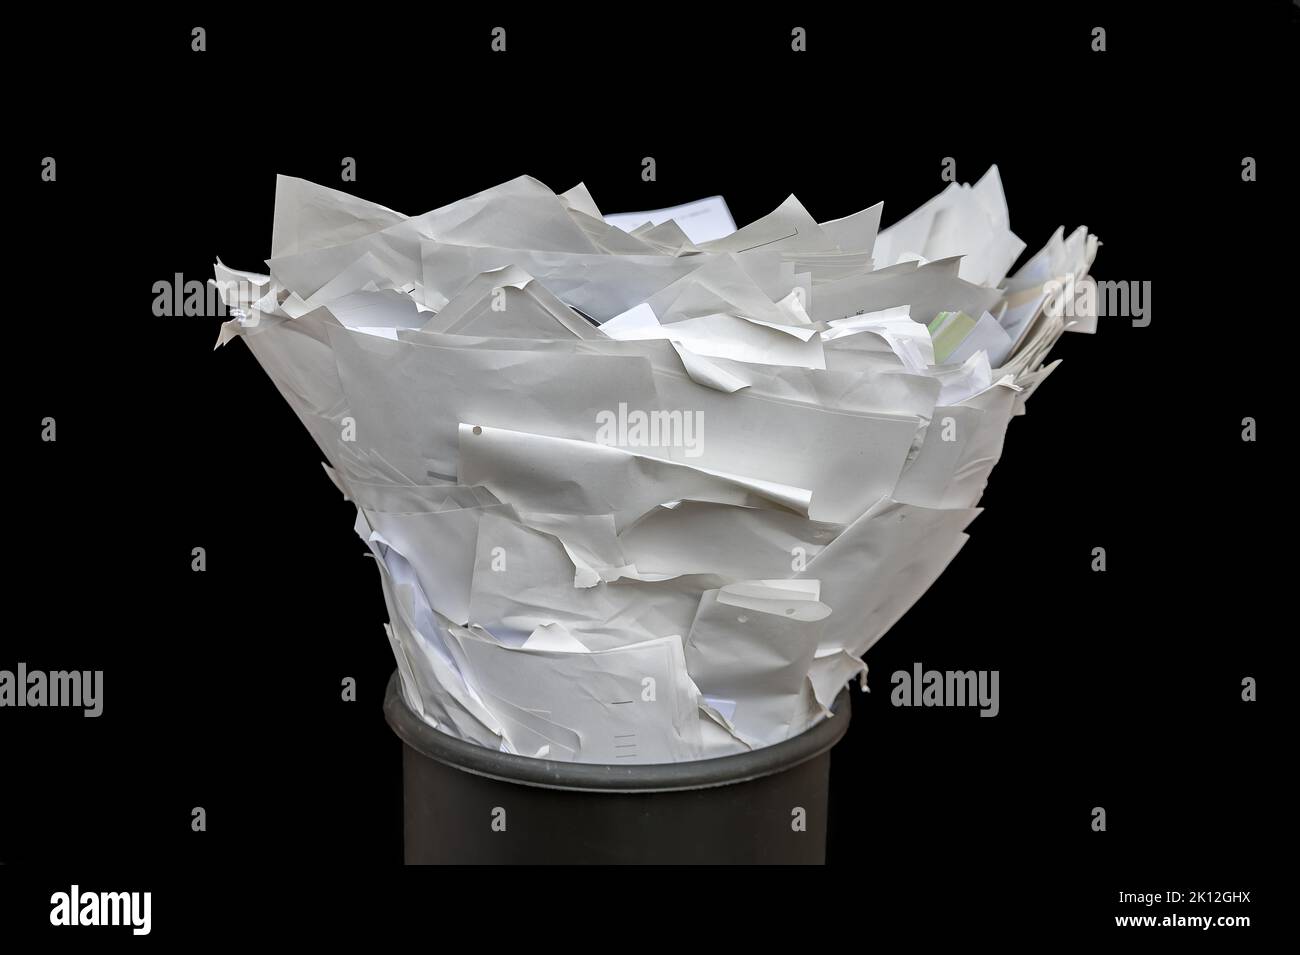 Full trash in a detailed shot against a black background Stock Photo